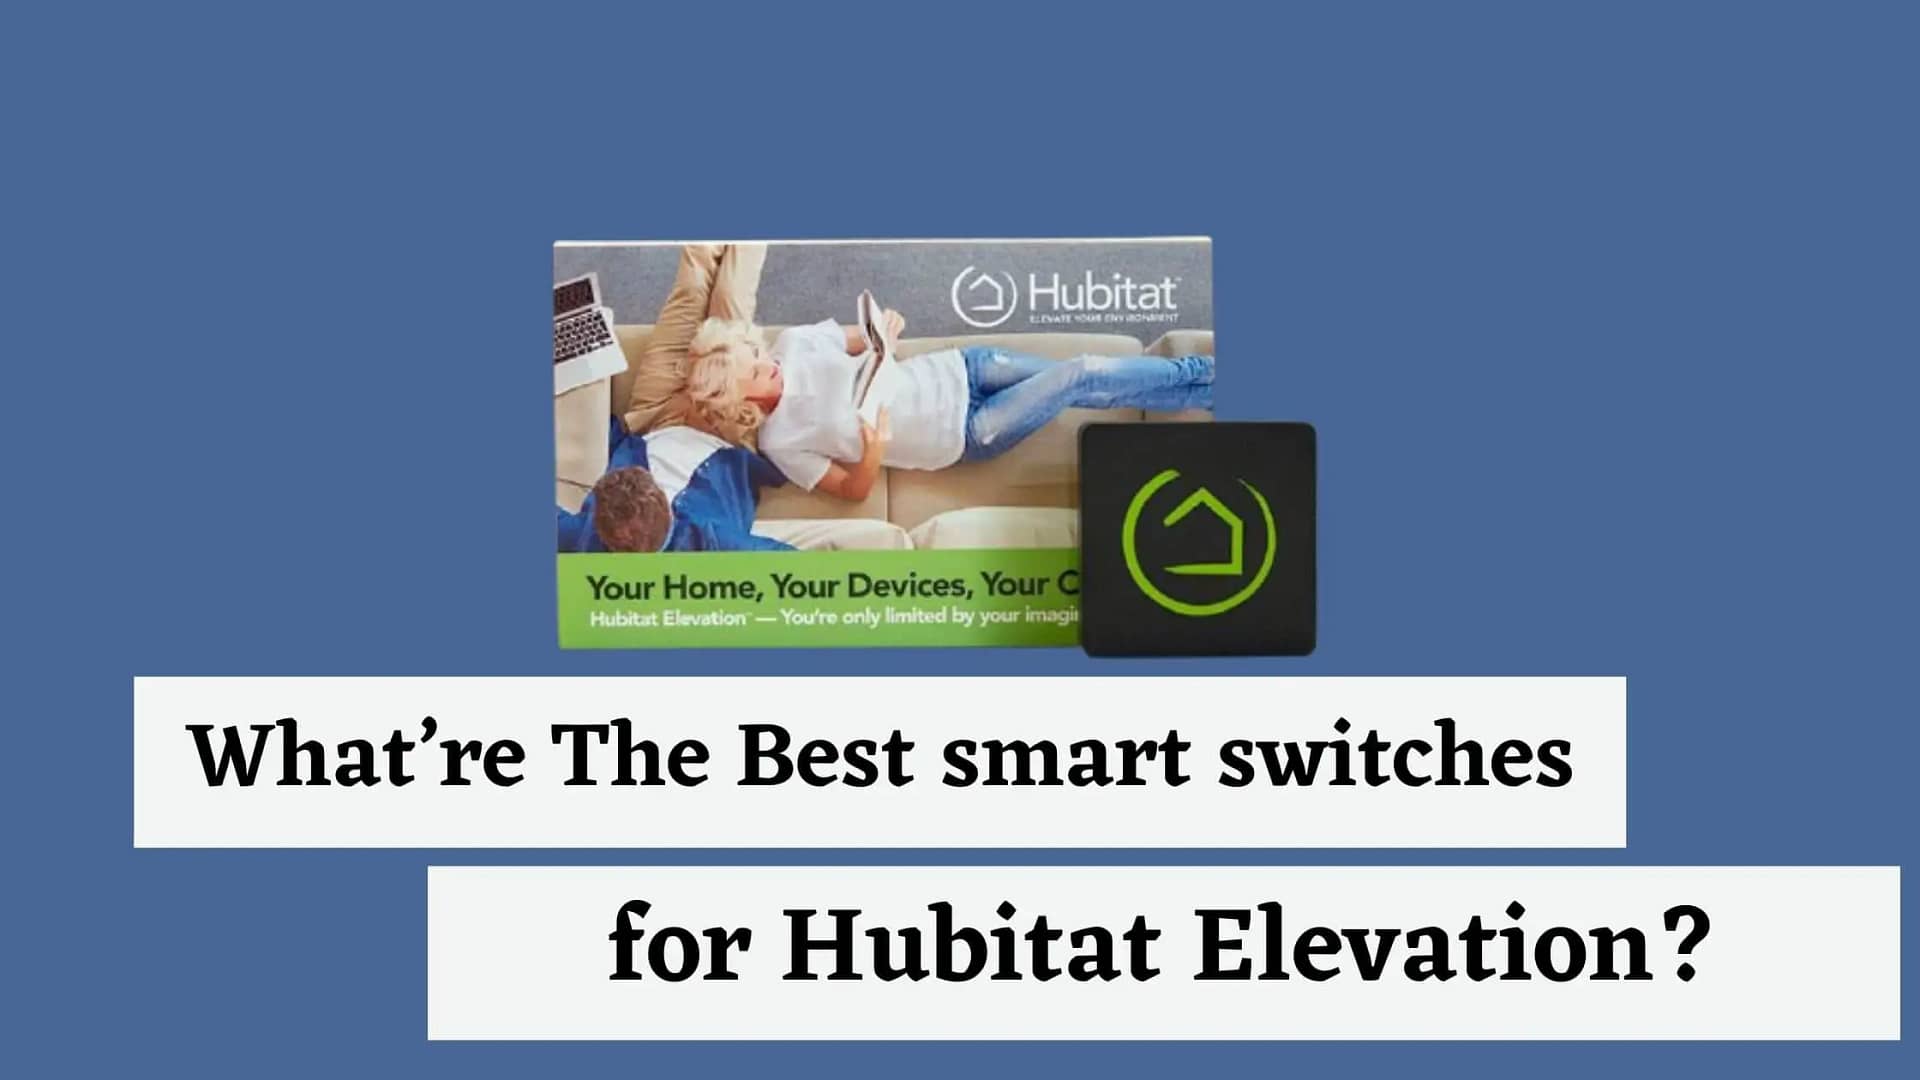 What’re The Best smart switches for Hubitat